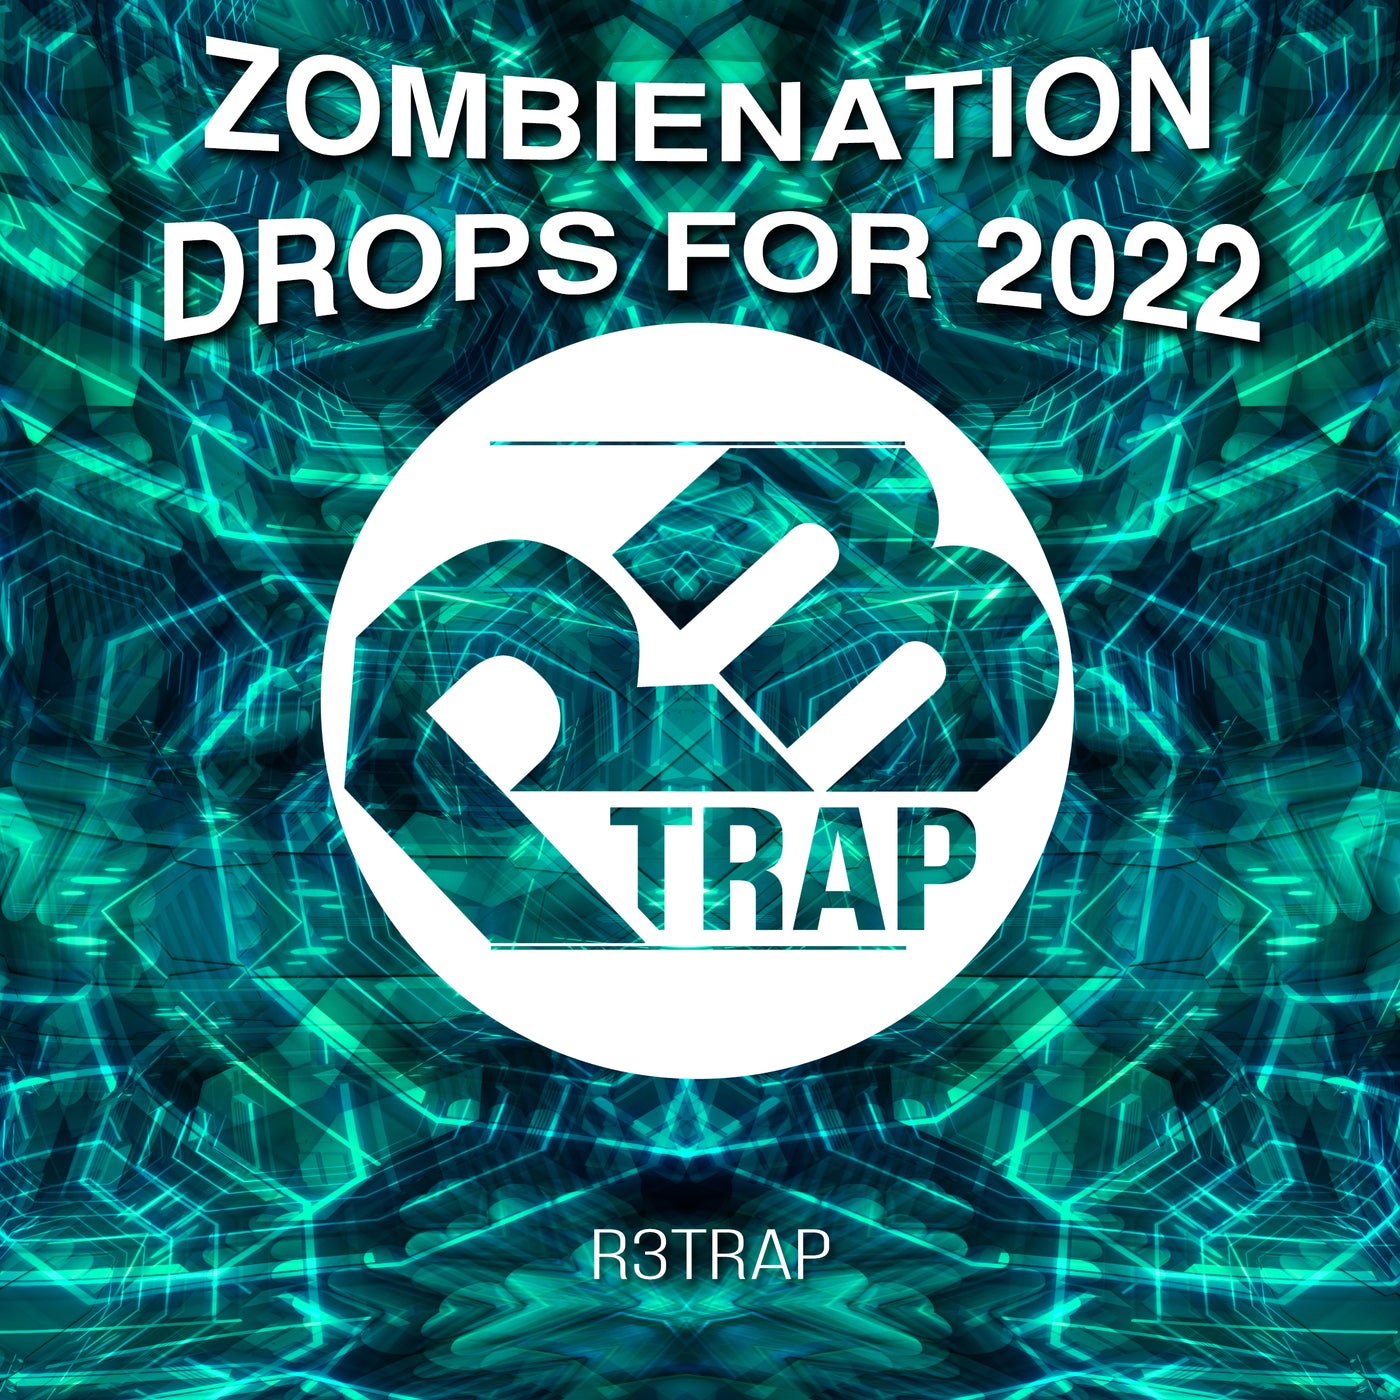 Zombienation Drops For 2022